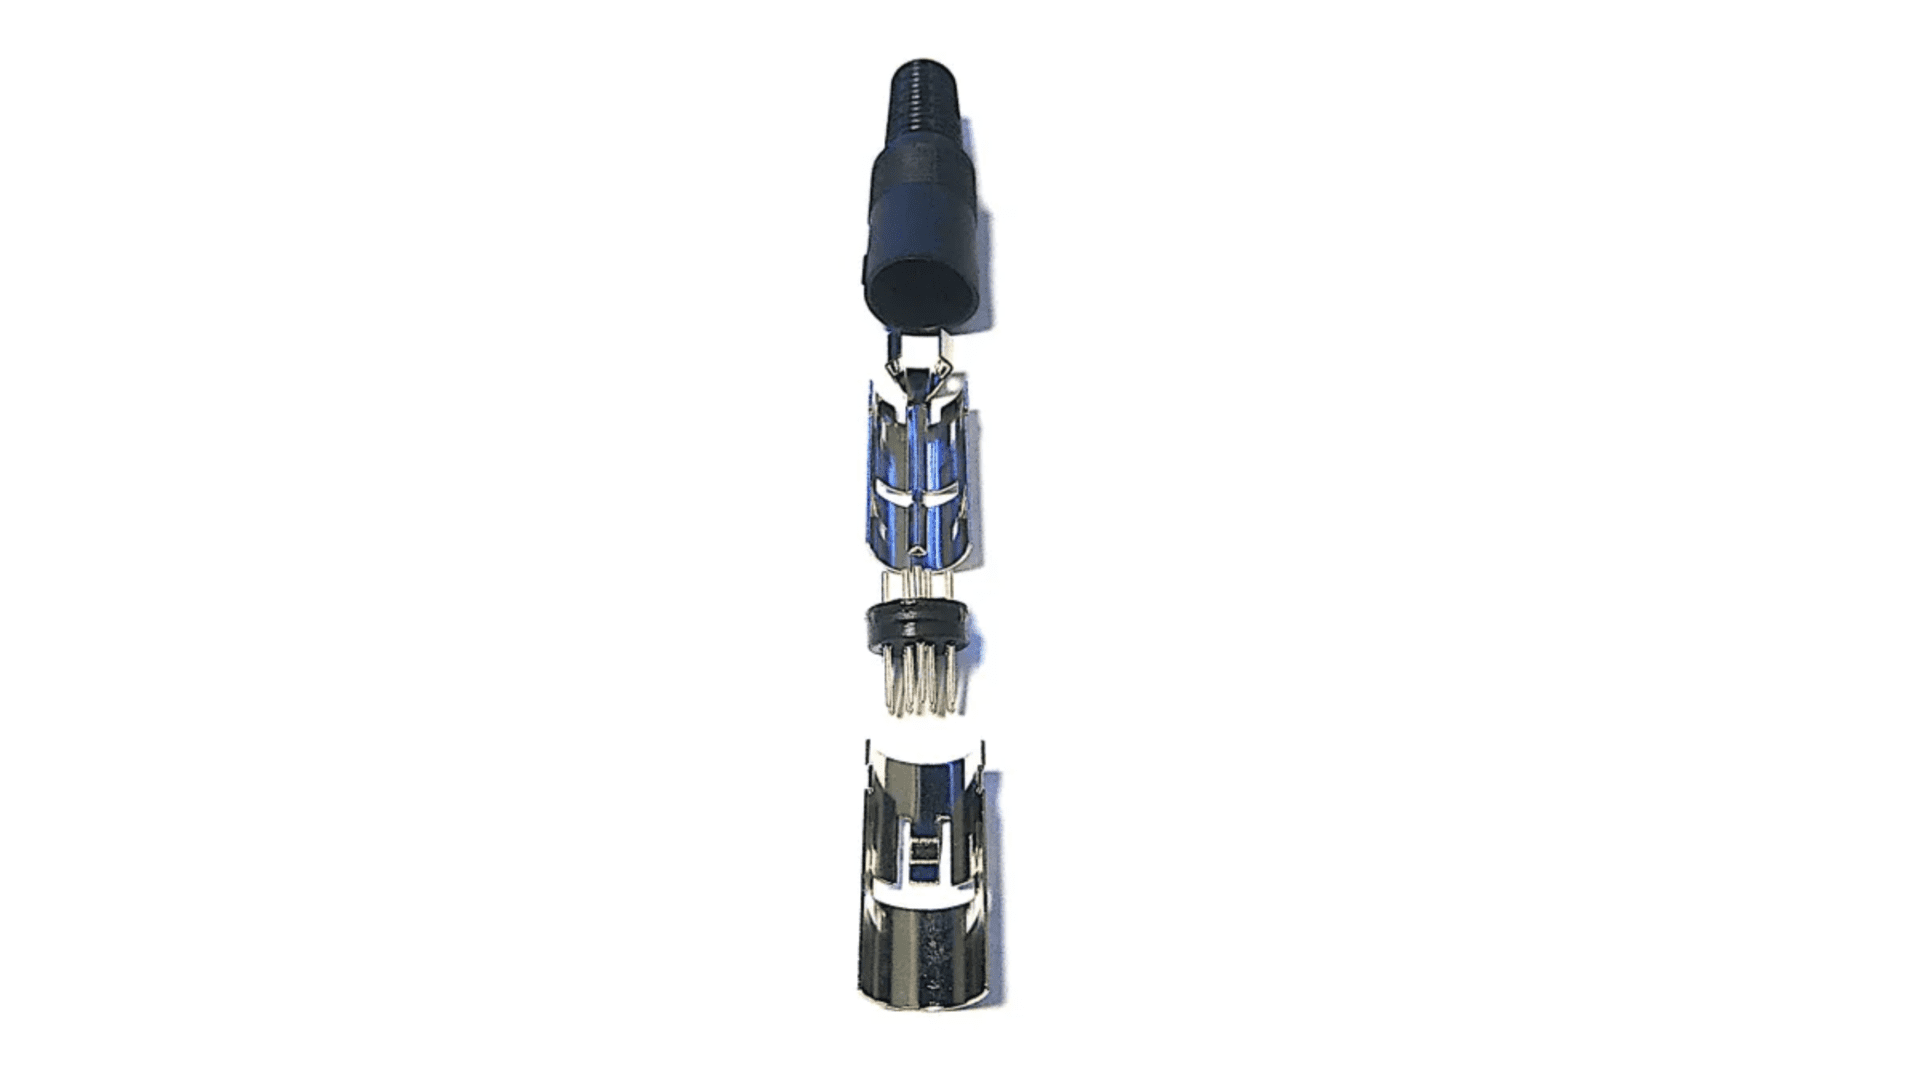 13 Pin Male Inline DIN Plug Audio Adapter Cable Connector with multiple interchangeable bits, displayed vertically against a white background.